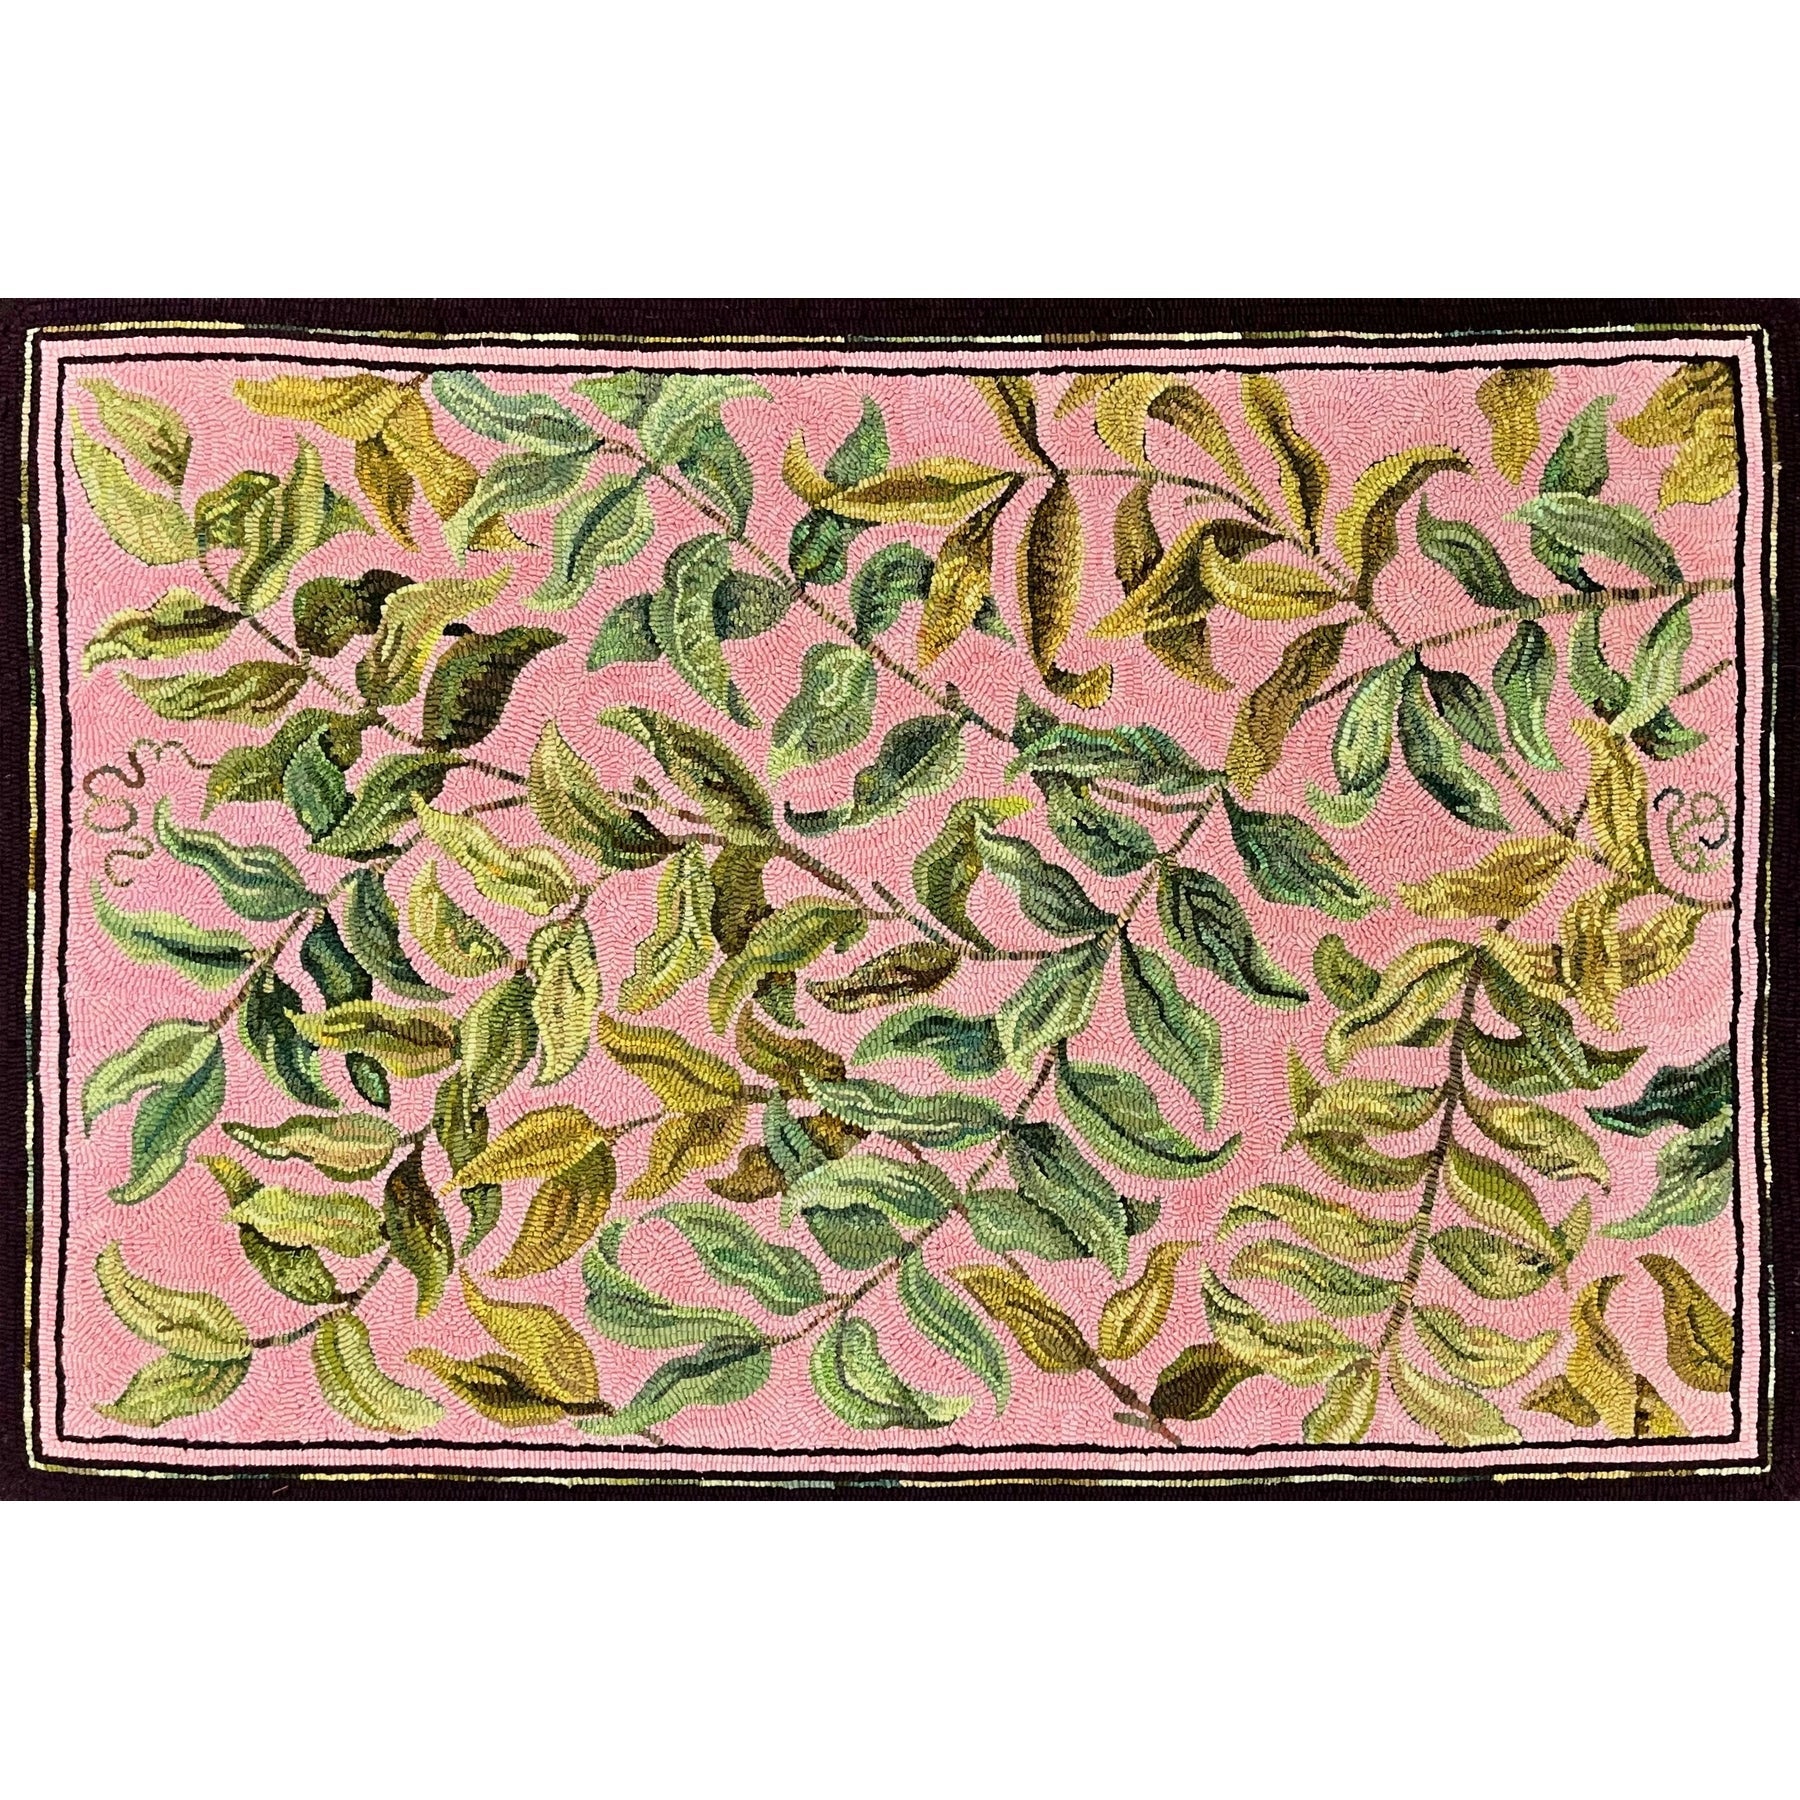 Morris Willows, rug hooked by Patty Piek-Groth